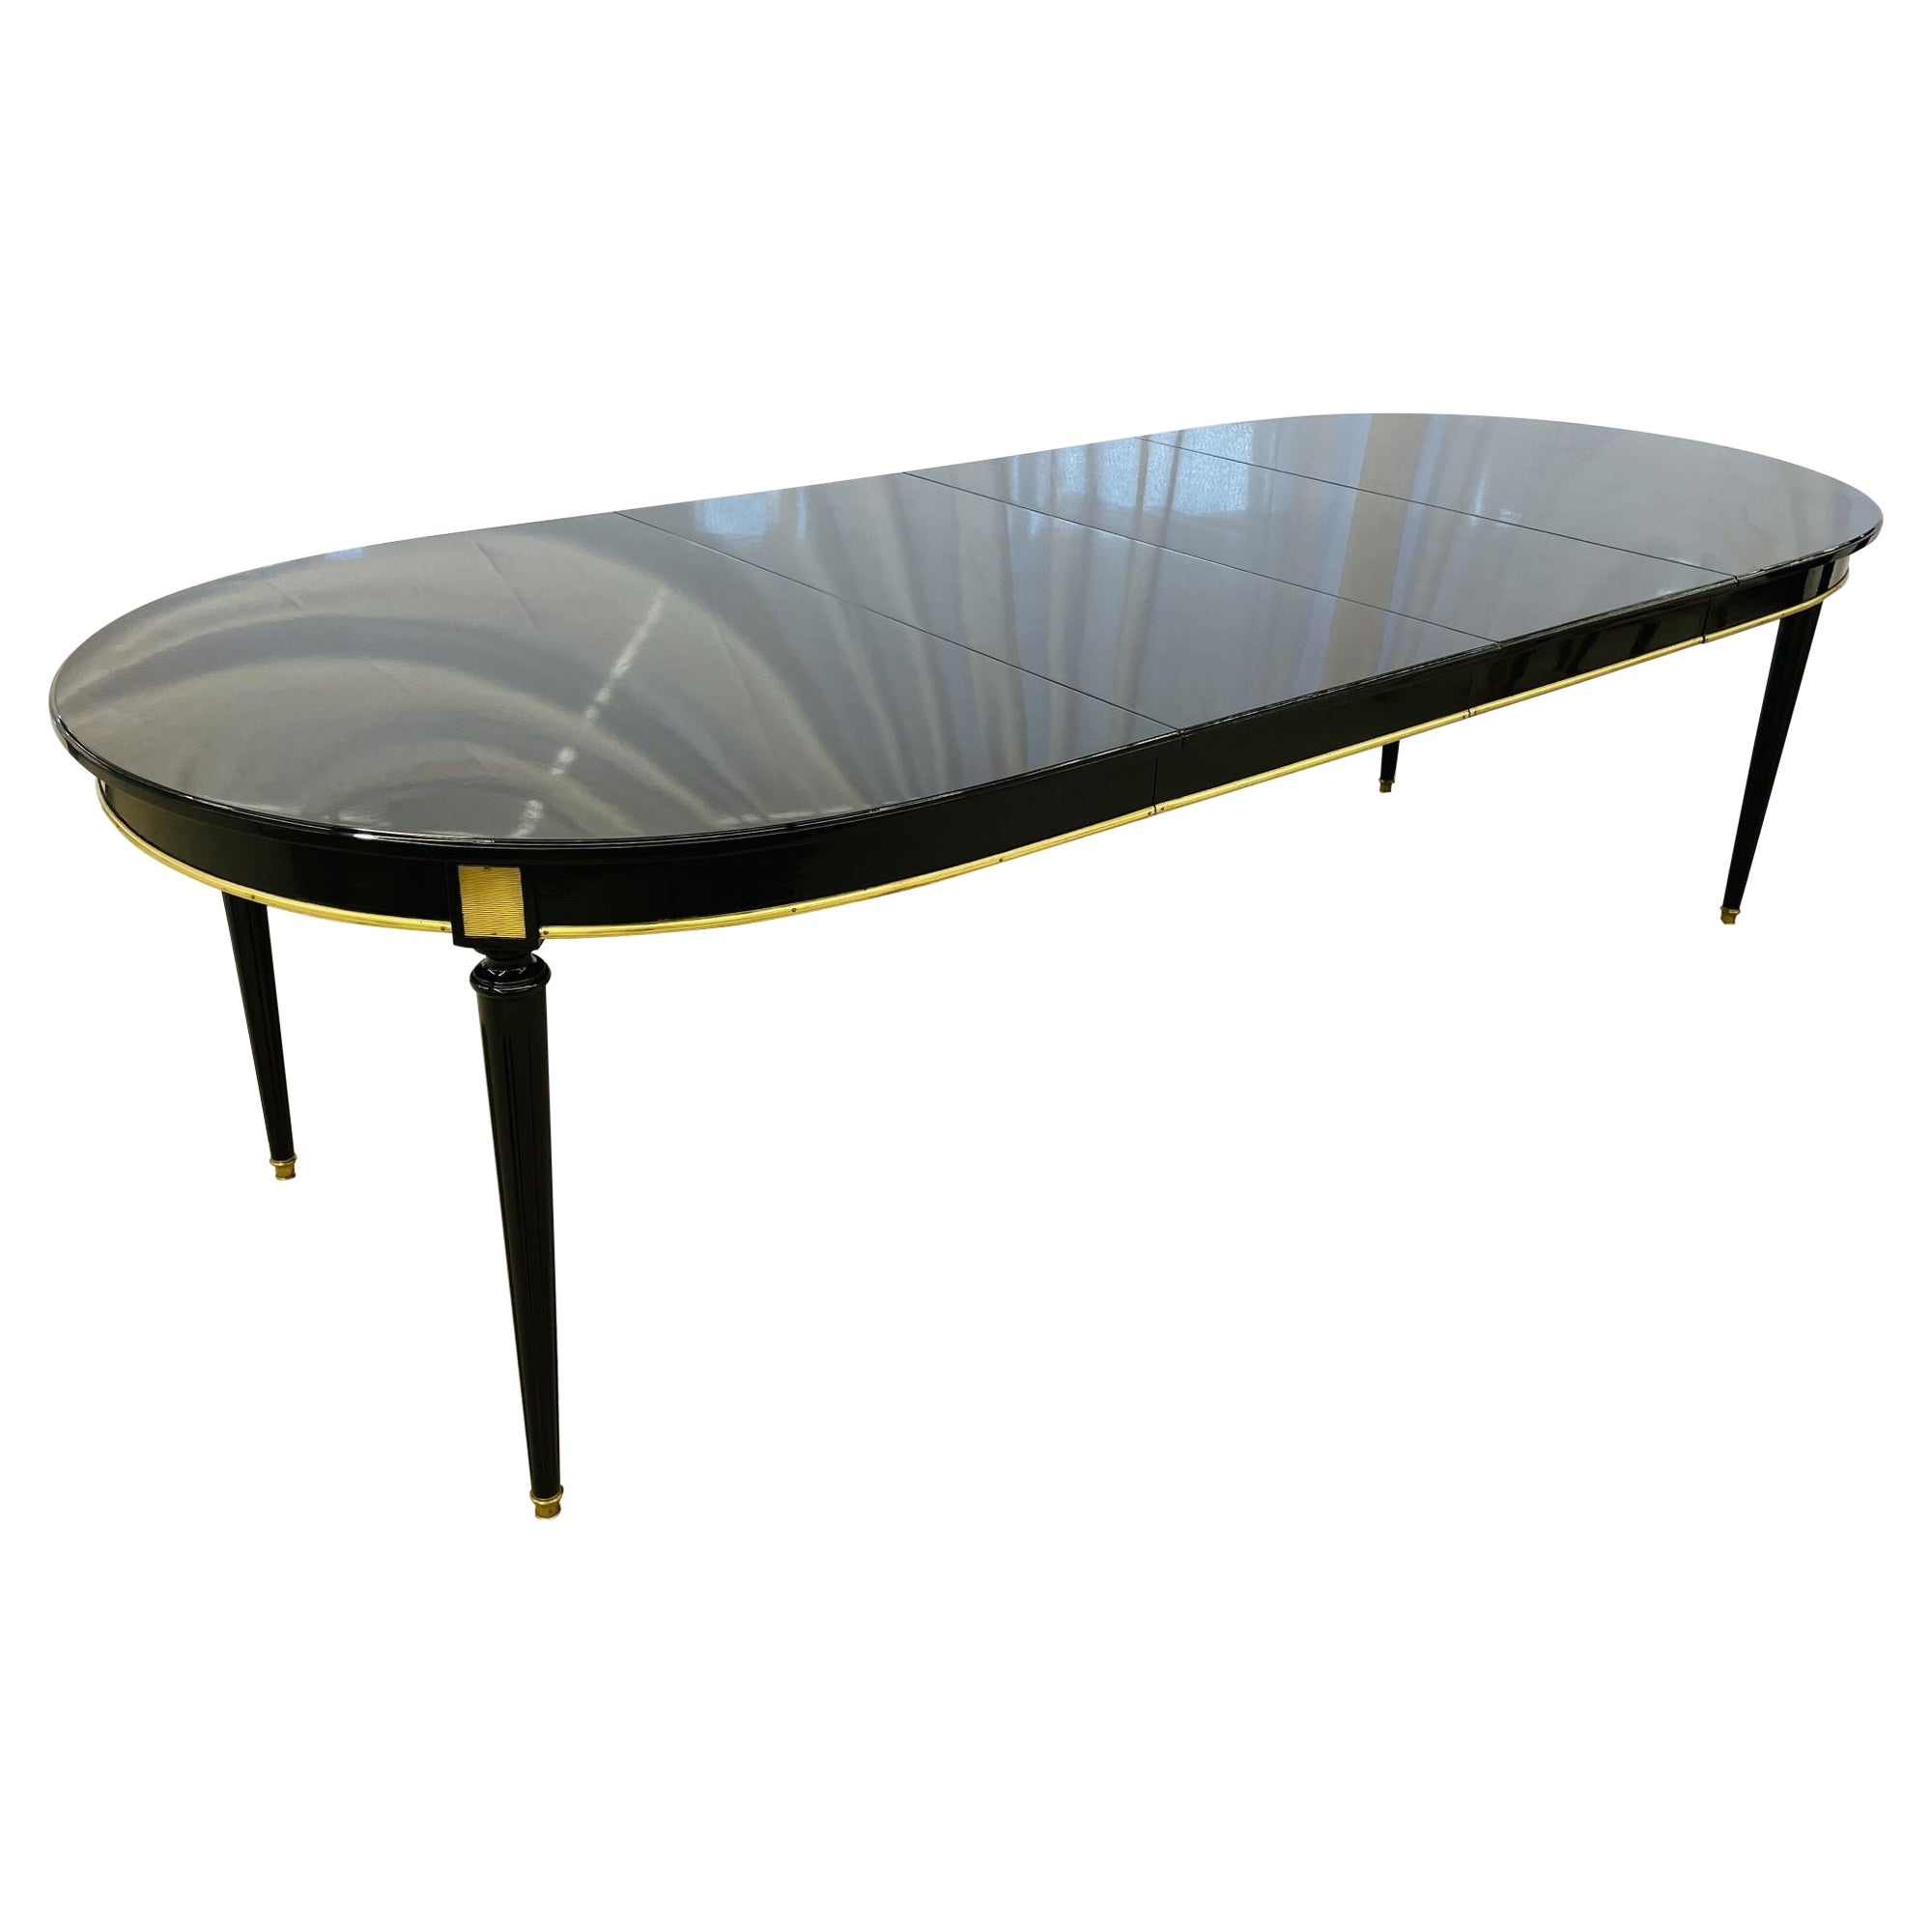 Maison Jansen Dining Table, Black Lacquered, Louis XVI Style, Bronze Mounted